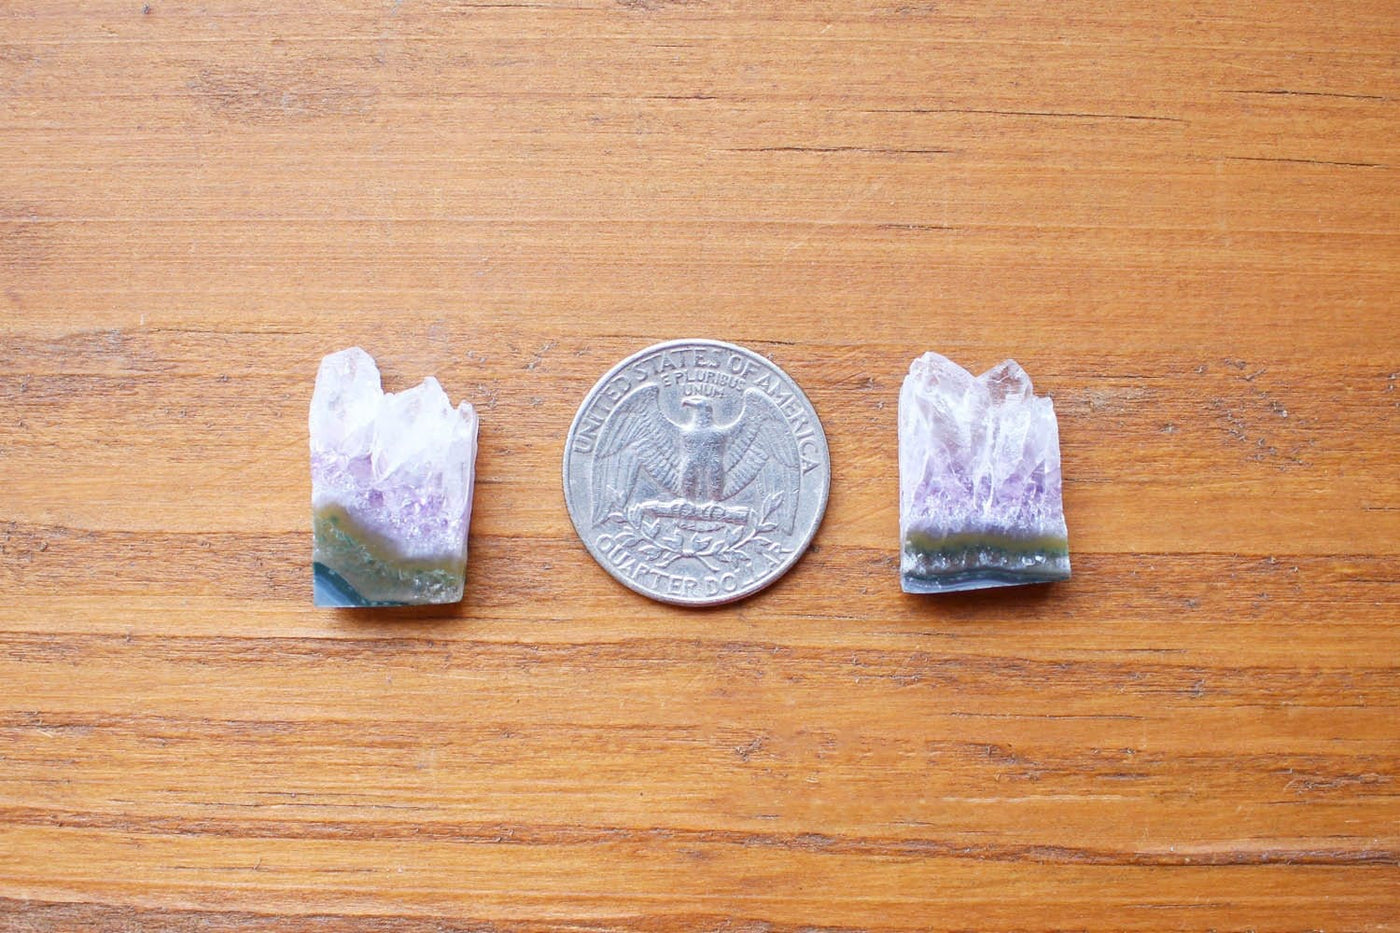 Thin Slice Gemstone pair next to quarter for size reference